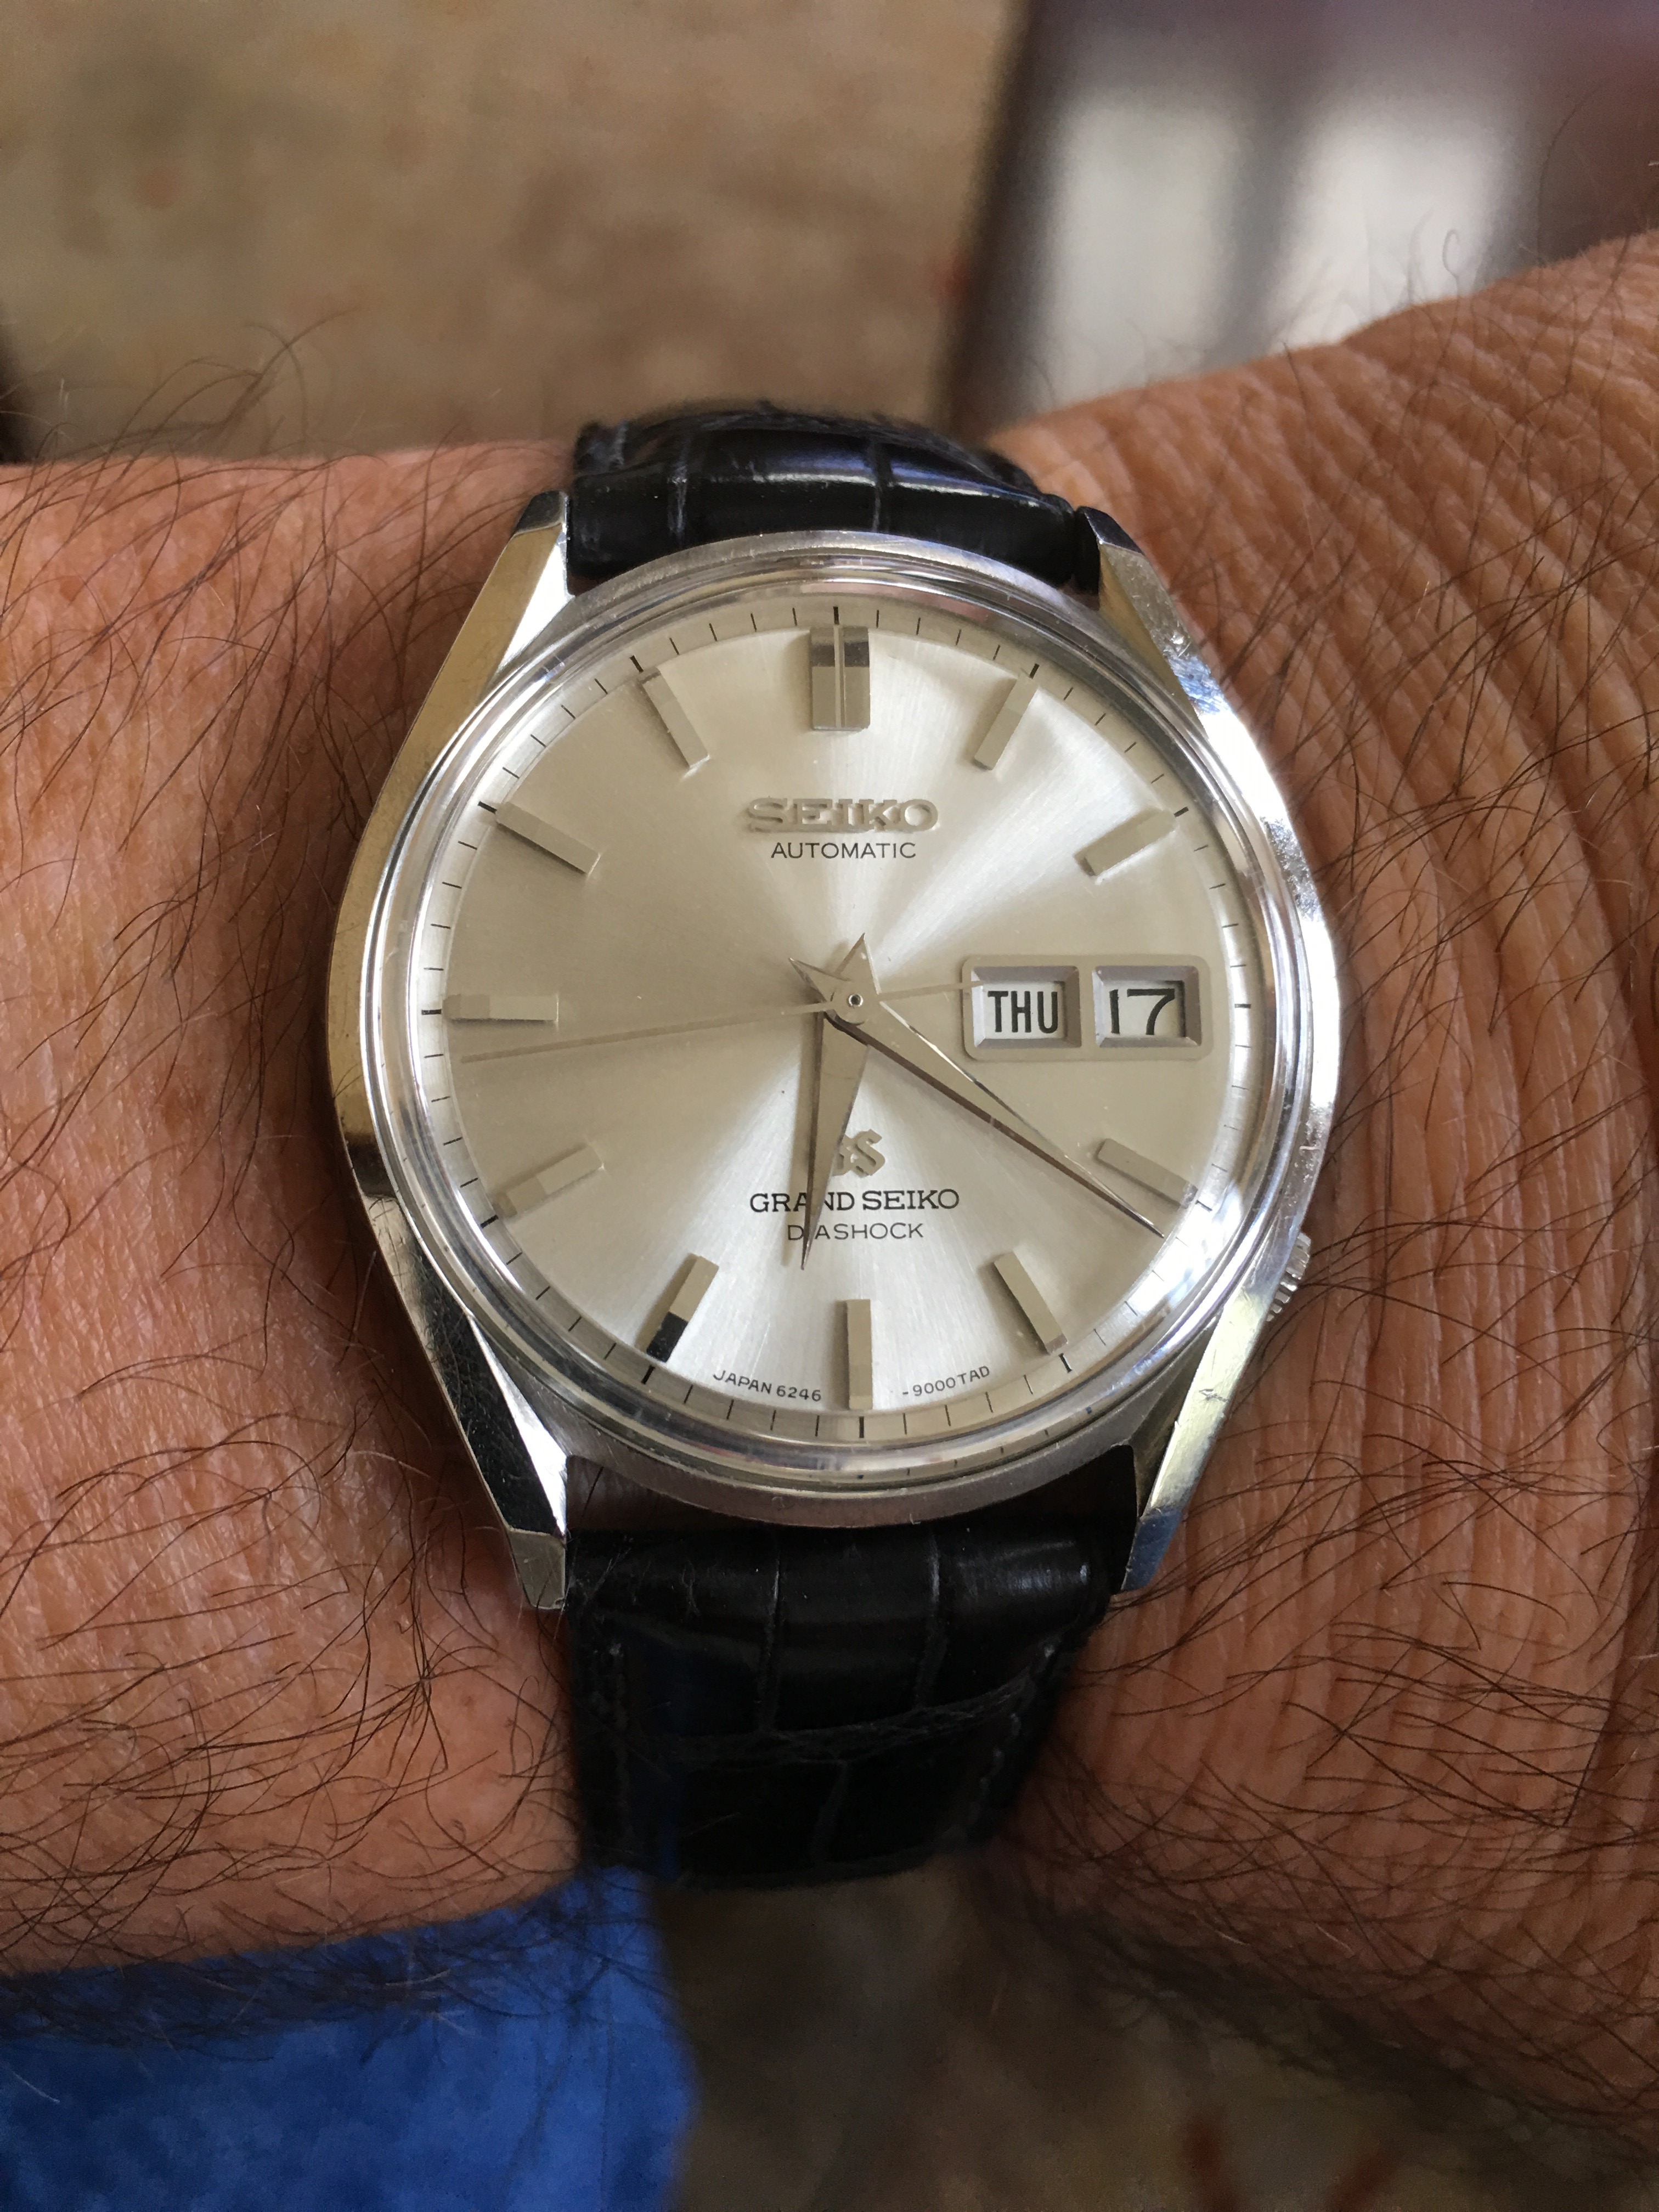 SOLD - 1967 Grand Seiko 6246-9001 Automatic Serviced | Omega Forums